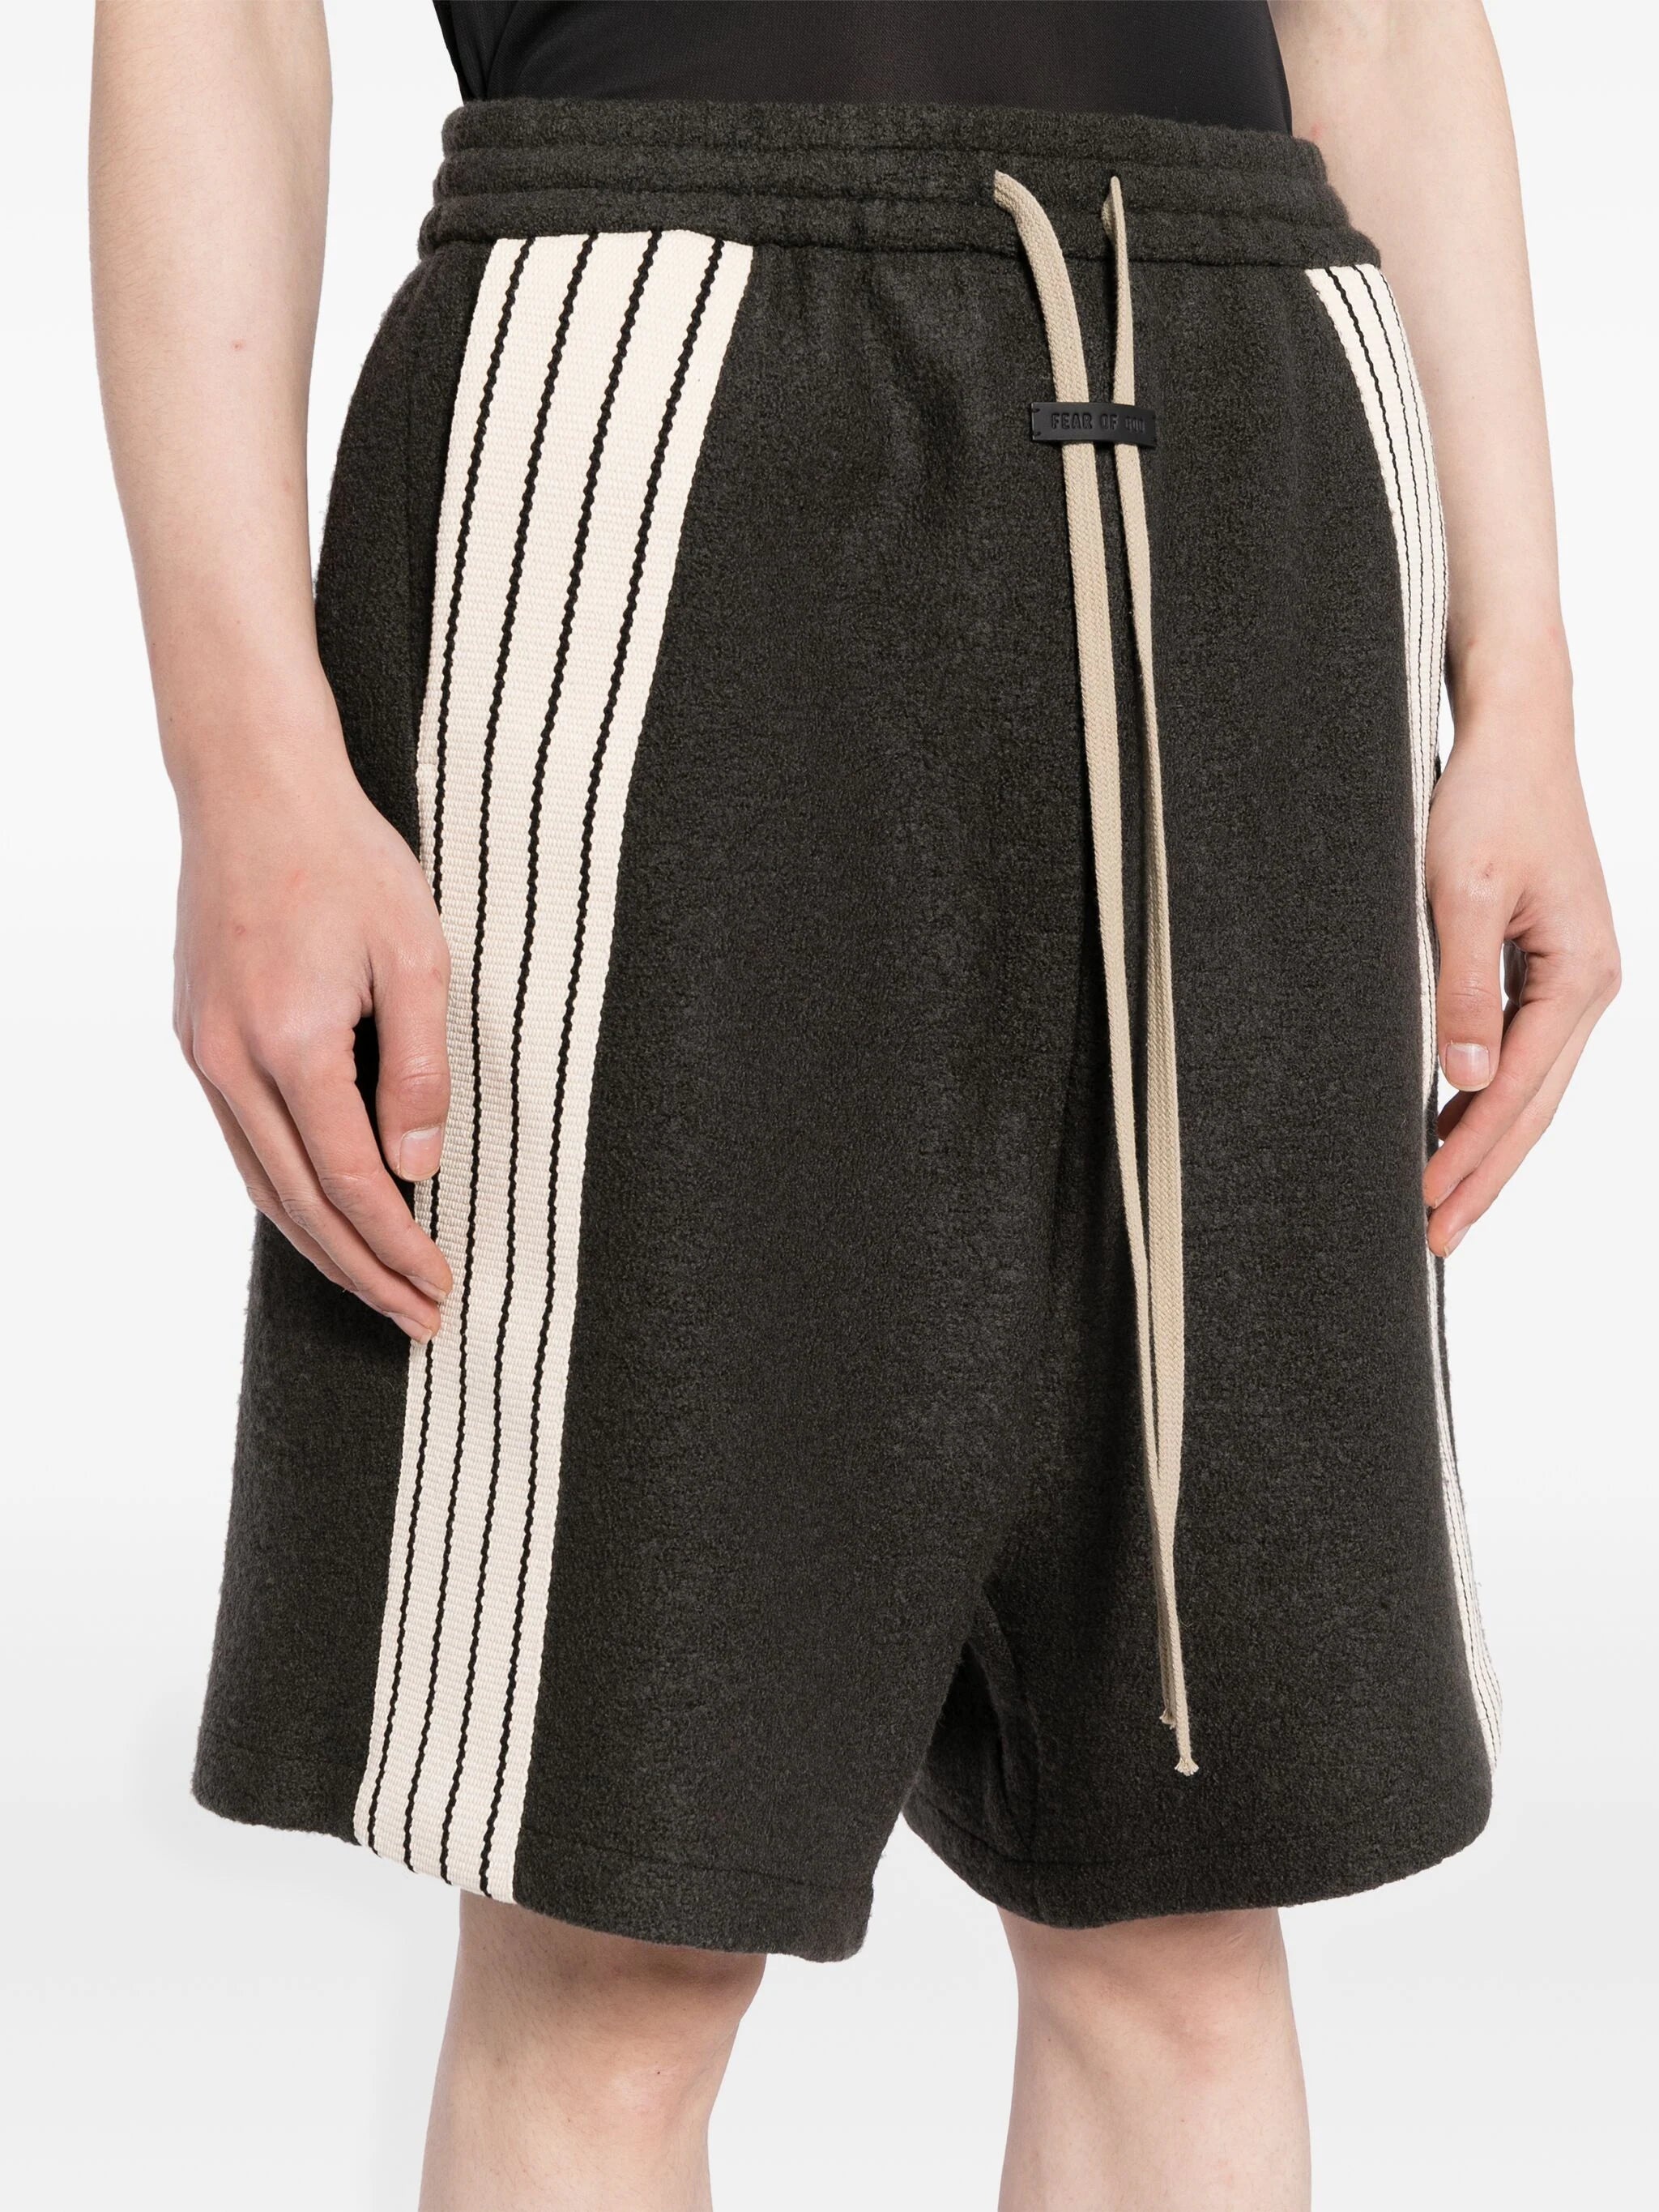 FEAR OF GOD Men Boiled Wool Striped Relaxed Short - 5